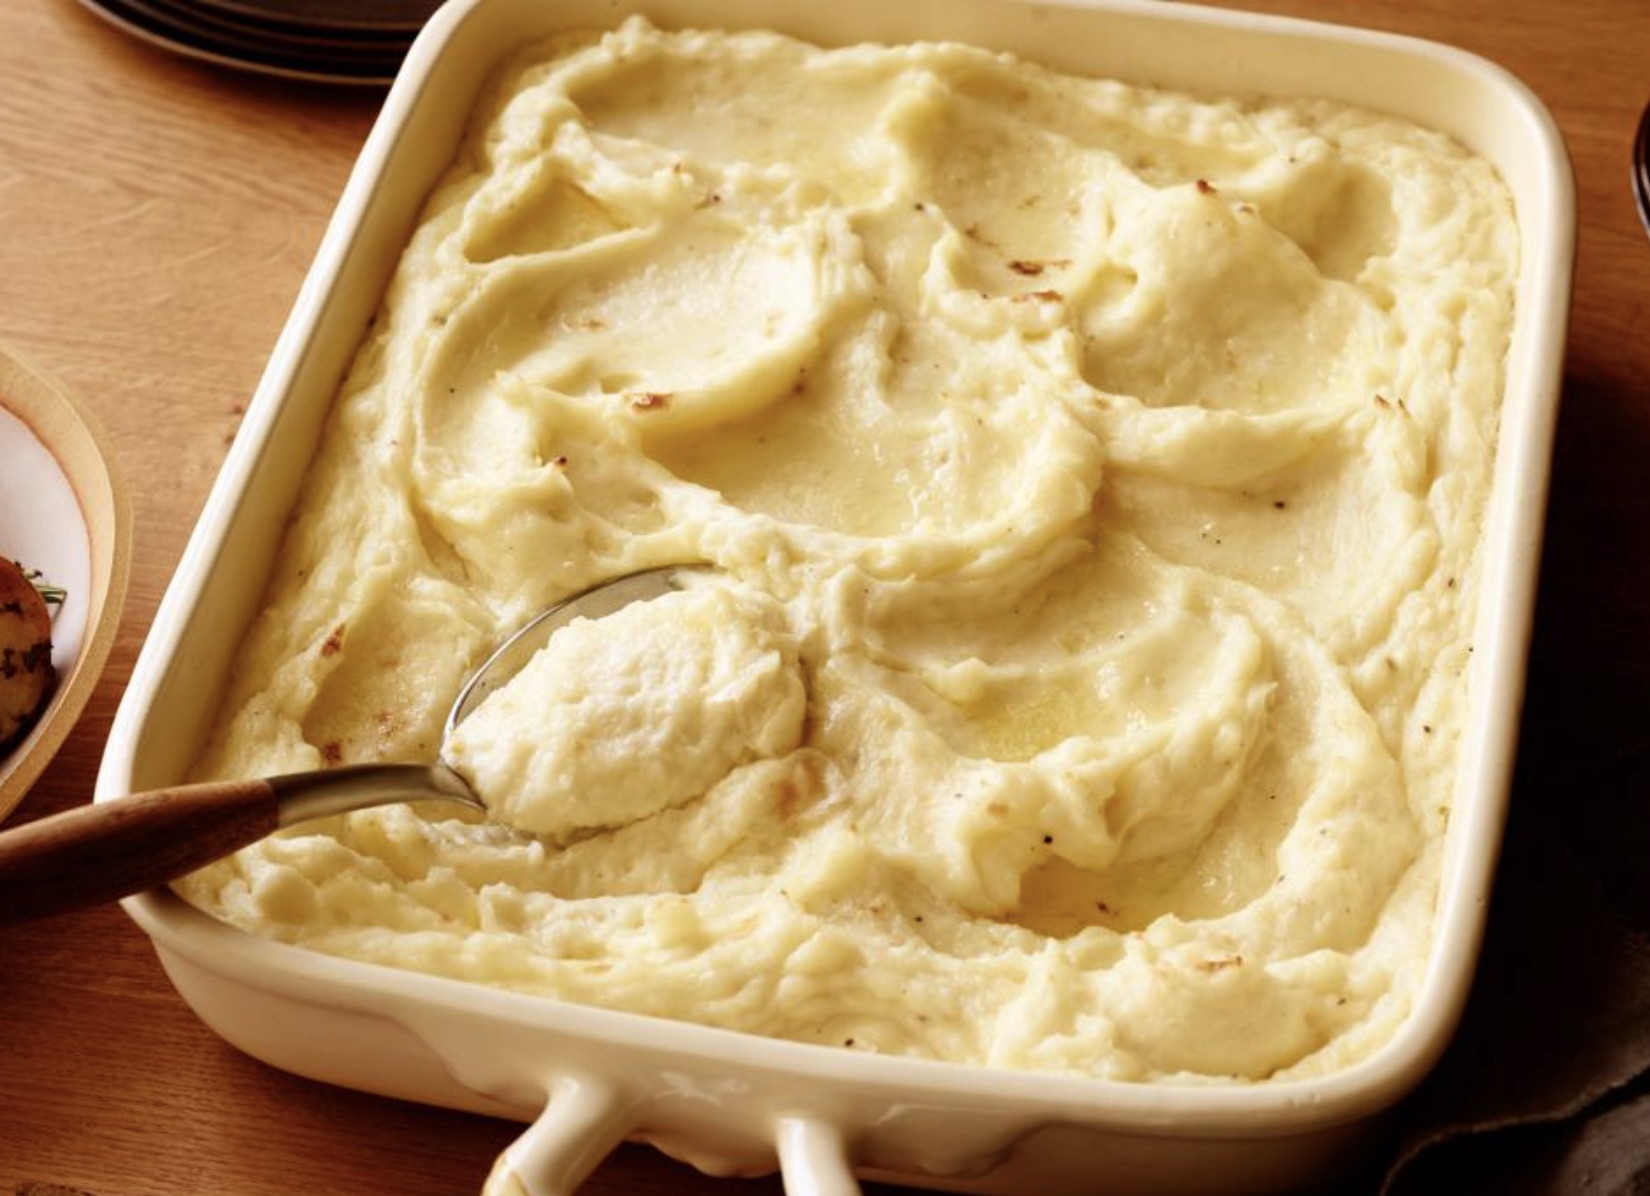 The Best Mashed Potatoes!